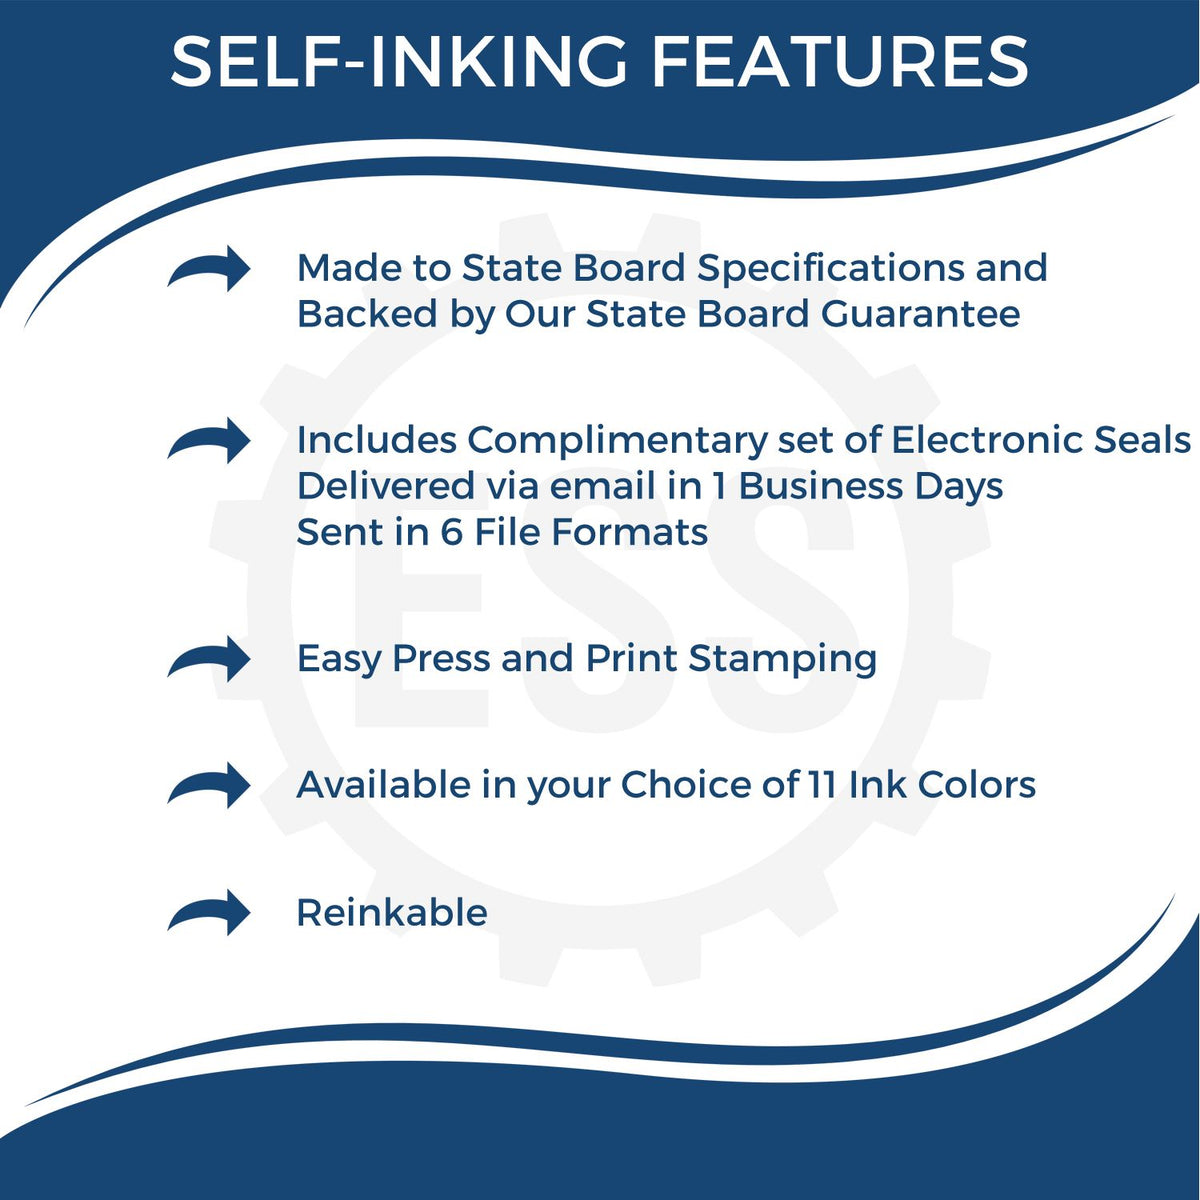 A picture of an infographic highlighting the selling points for the Self-Inking North Dakota Geologist Stamp